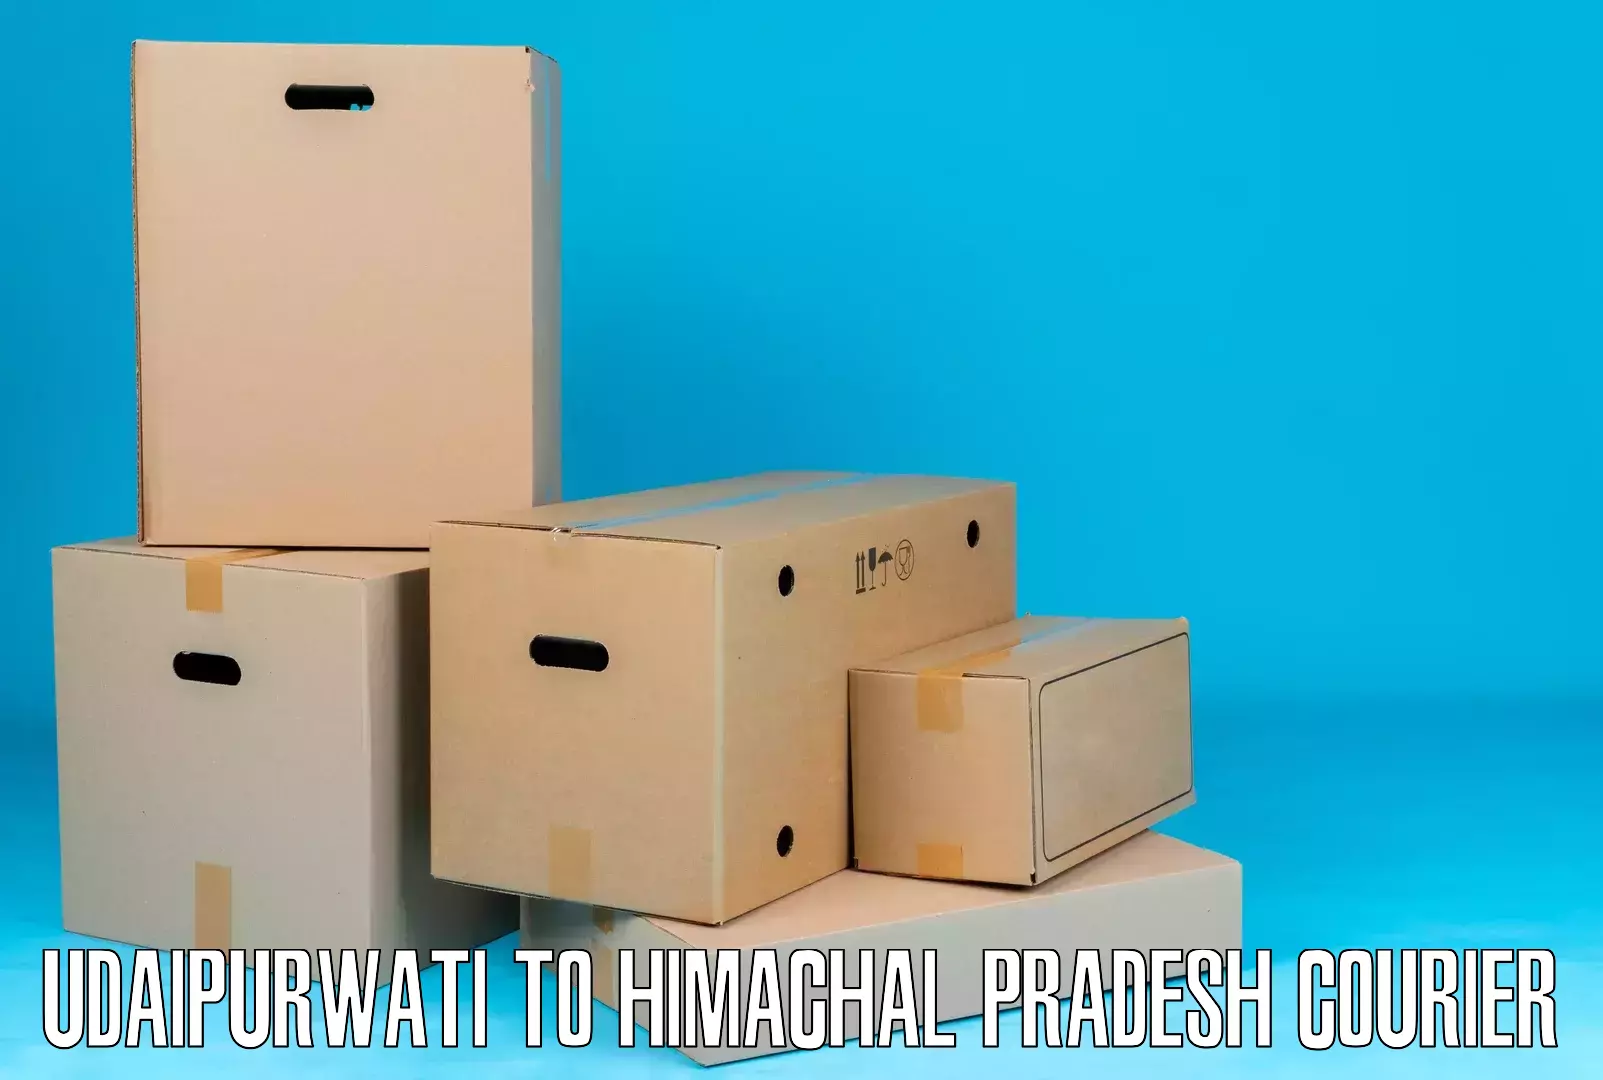 Discounted shipping Udaipurwati to Waknaghat